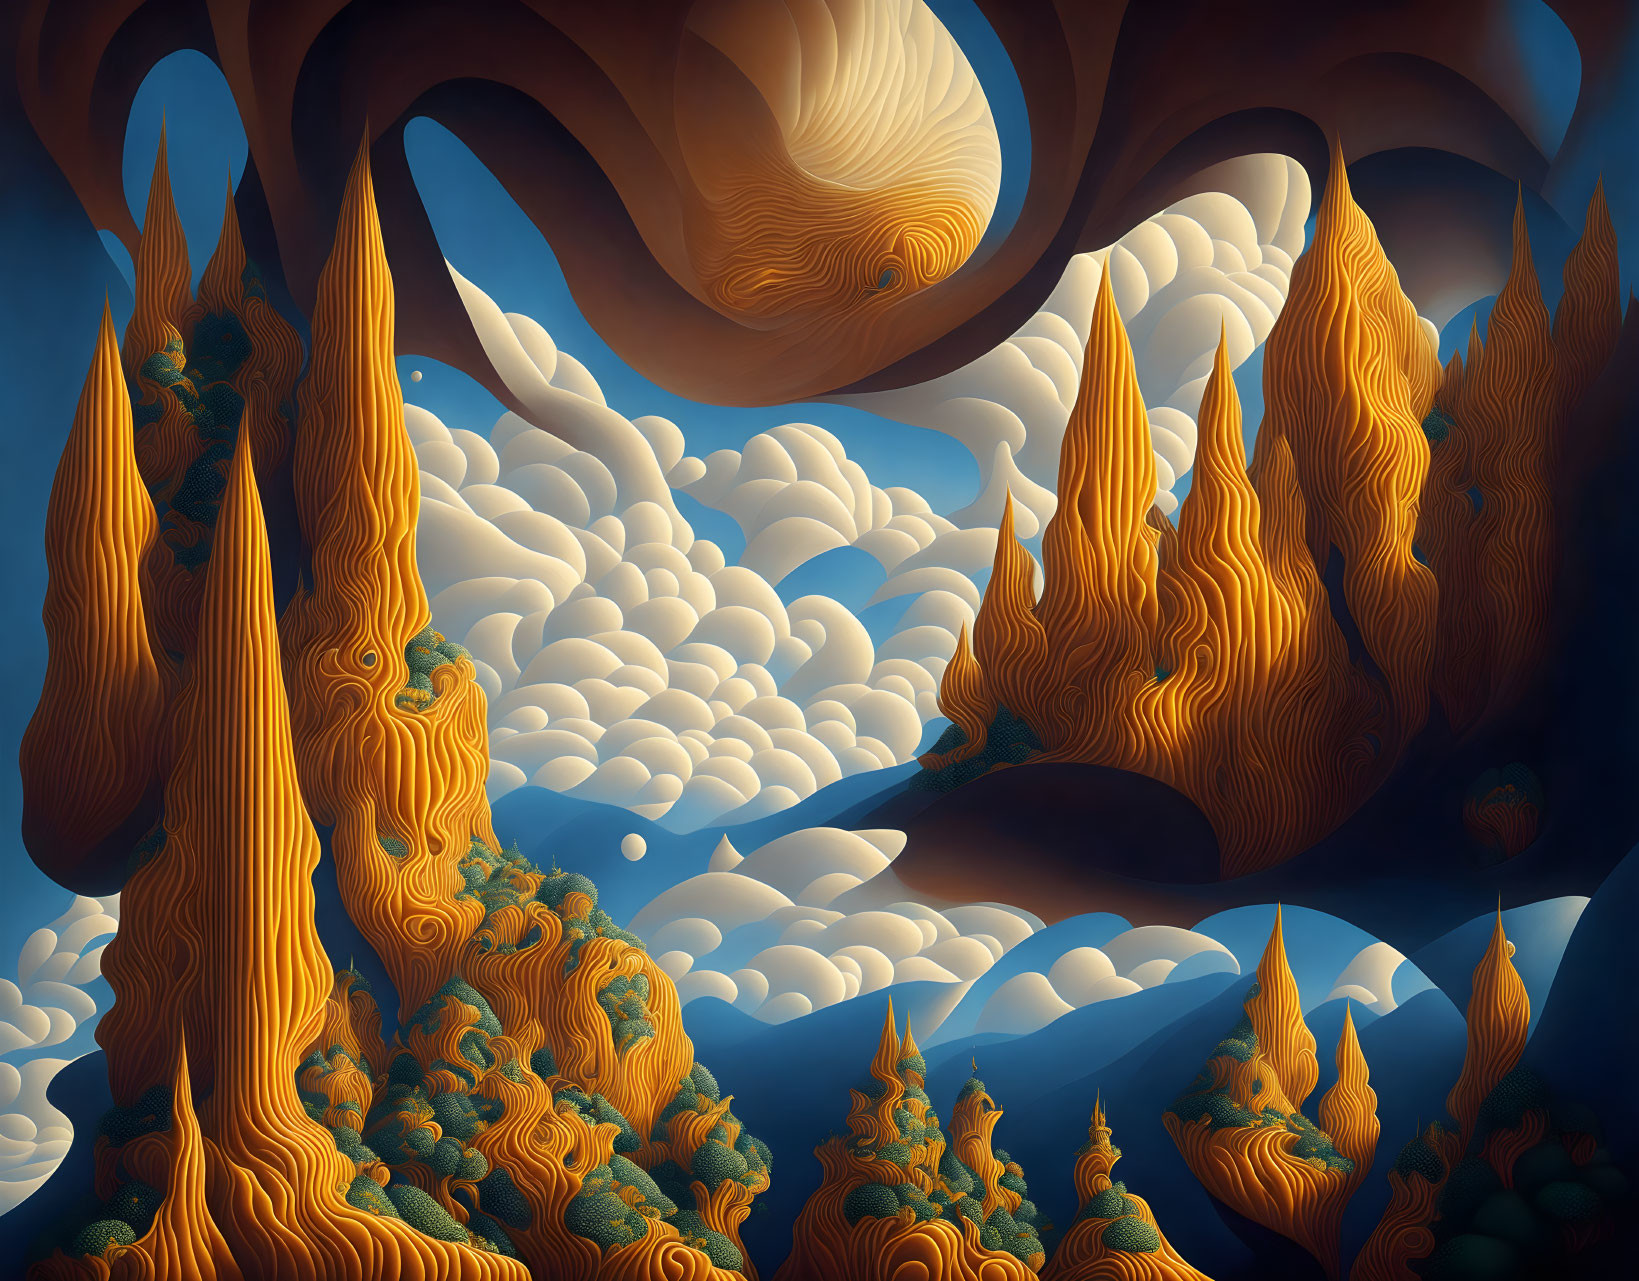 Stylized orange cliffs in surreal landscape with undulating clouds